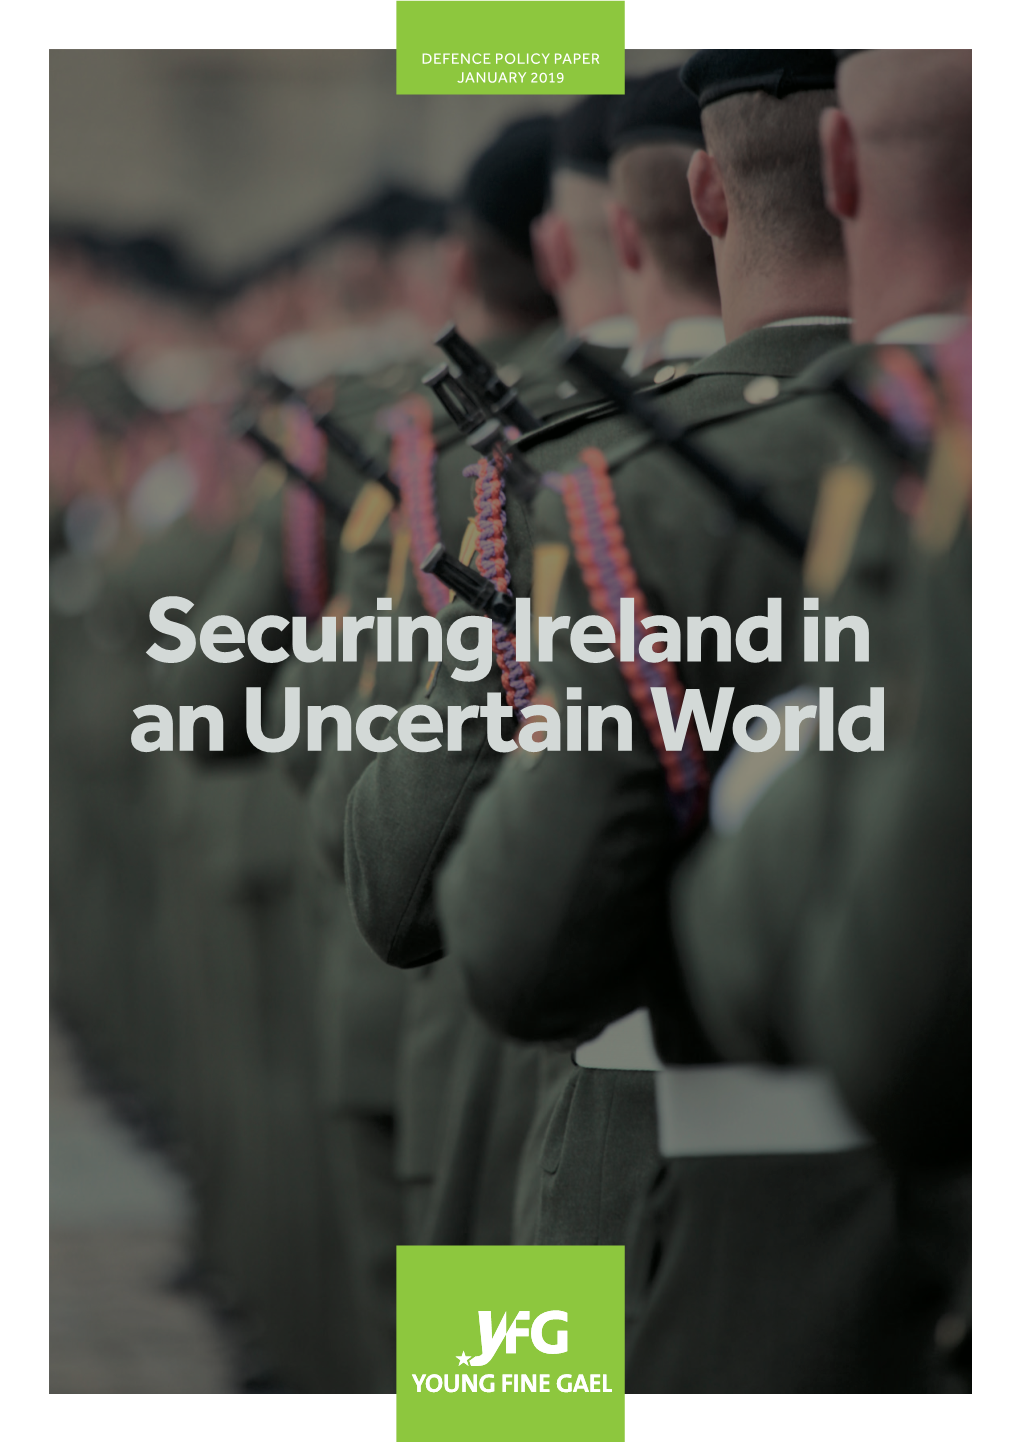 “Securing Ireland in an Uncertain World” Defence Document